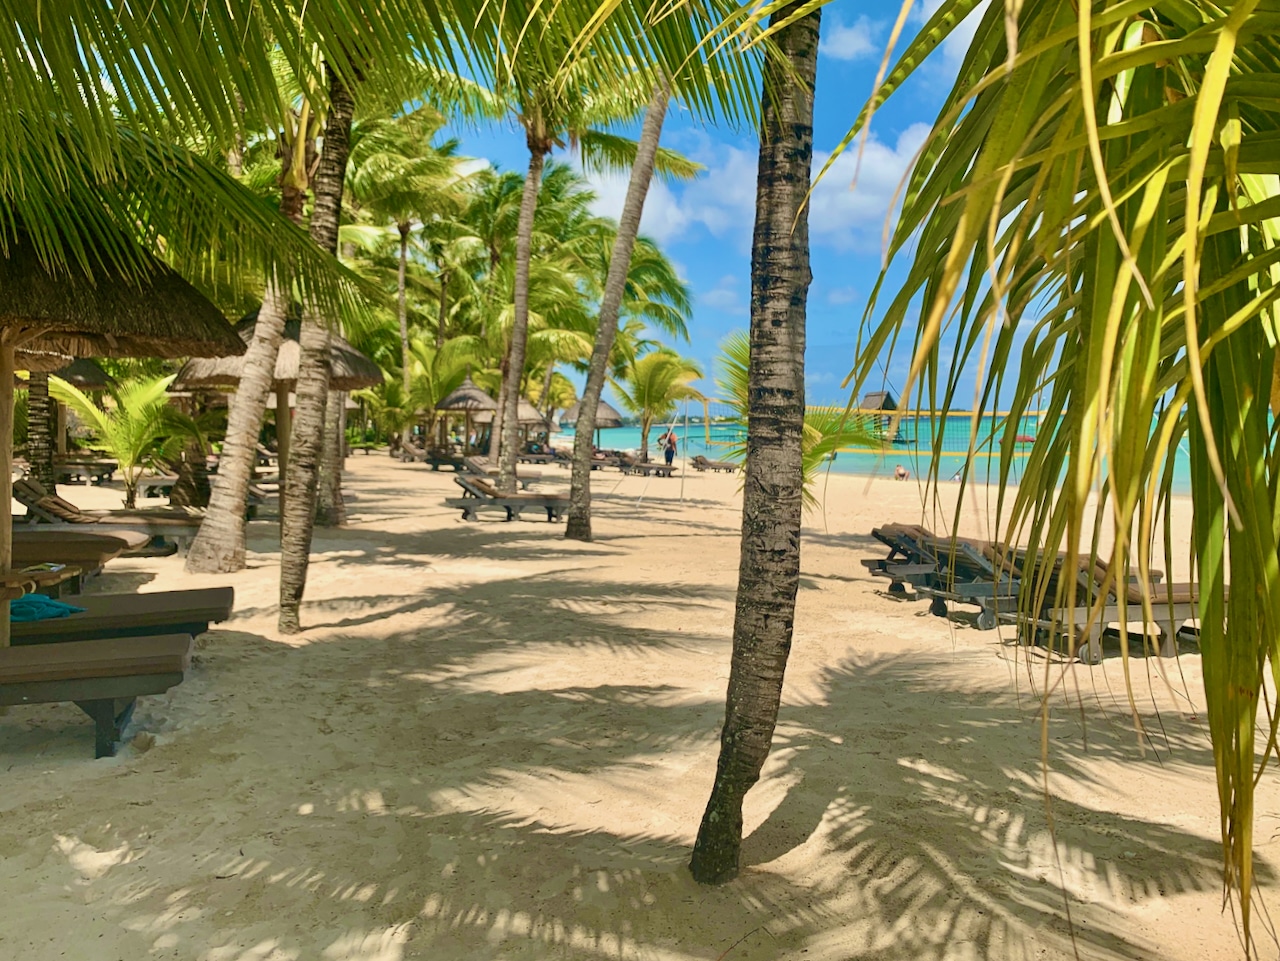 My first Mauritius experience - welcome to paradise Mauritius is a tropical summer day's dream - welcome to paradise. Photo: Sascha Tegtmeyer